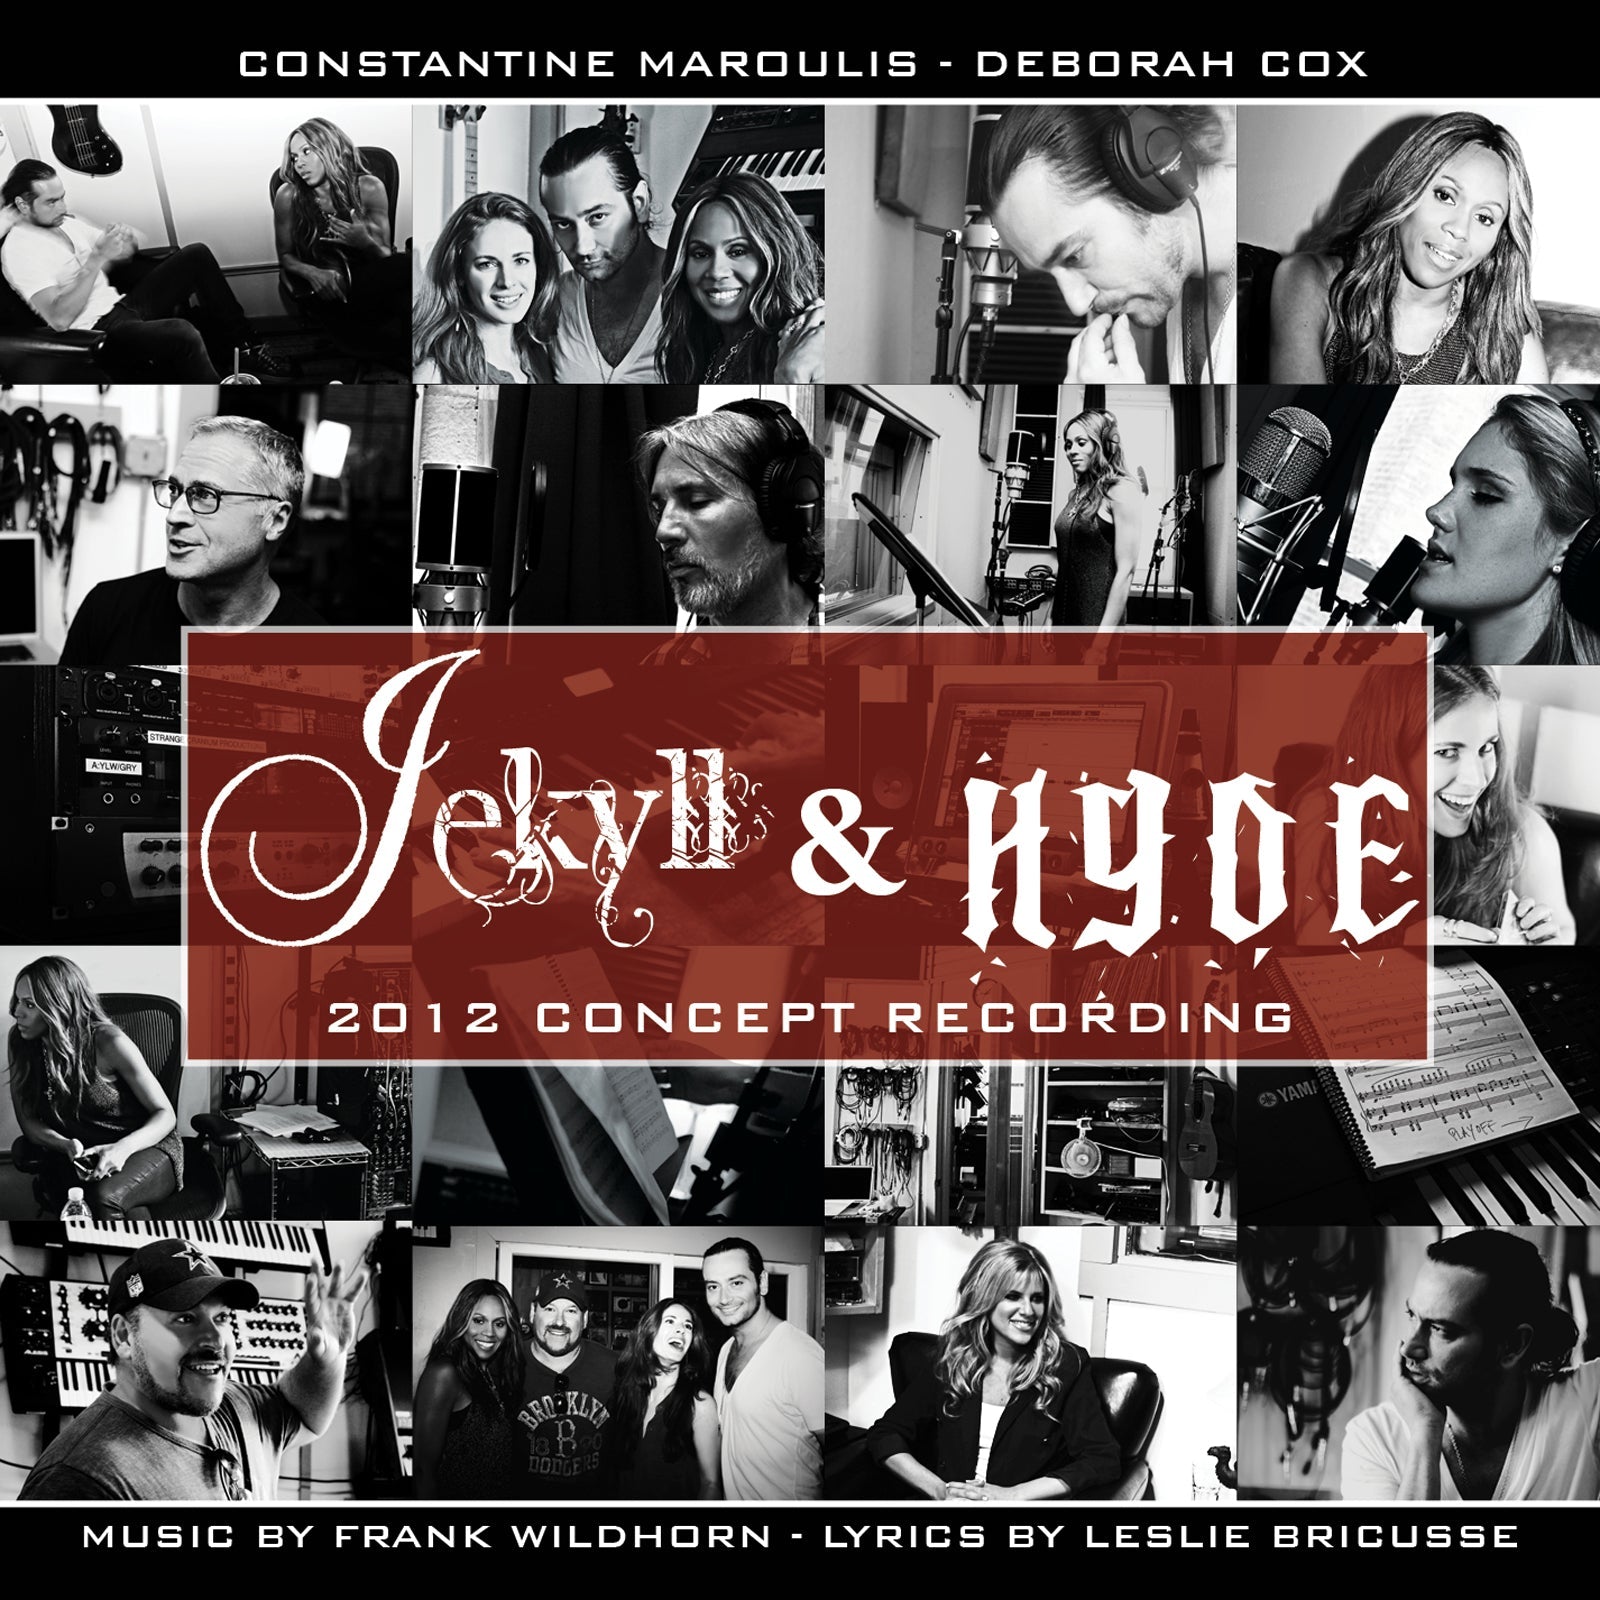 Jekyll & Hyde (2012 Concept Recording) [MP3]